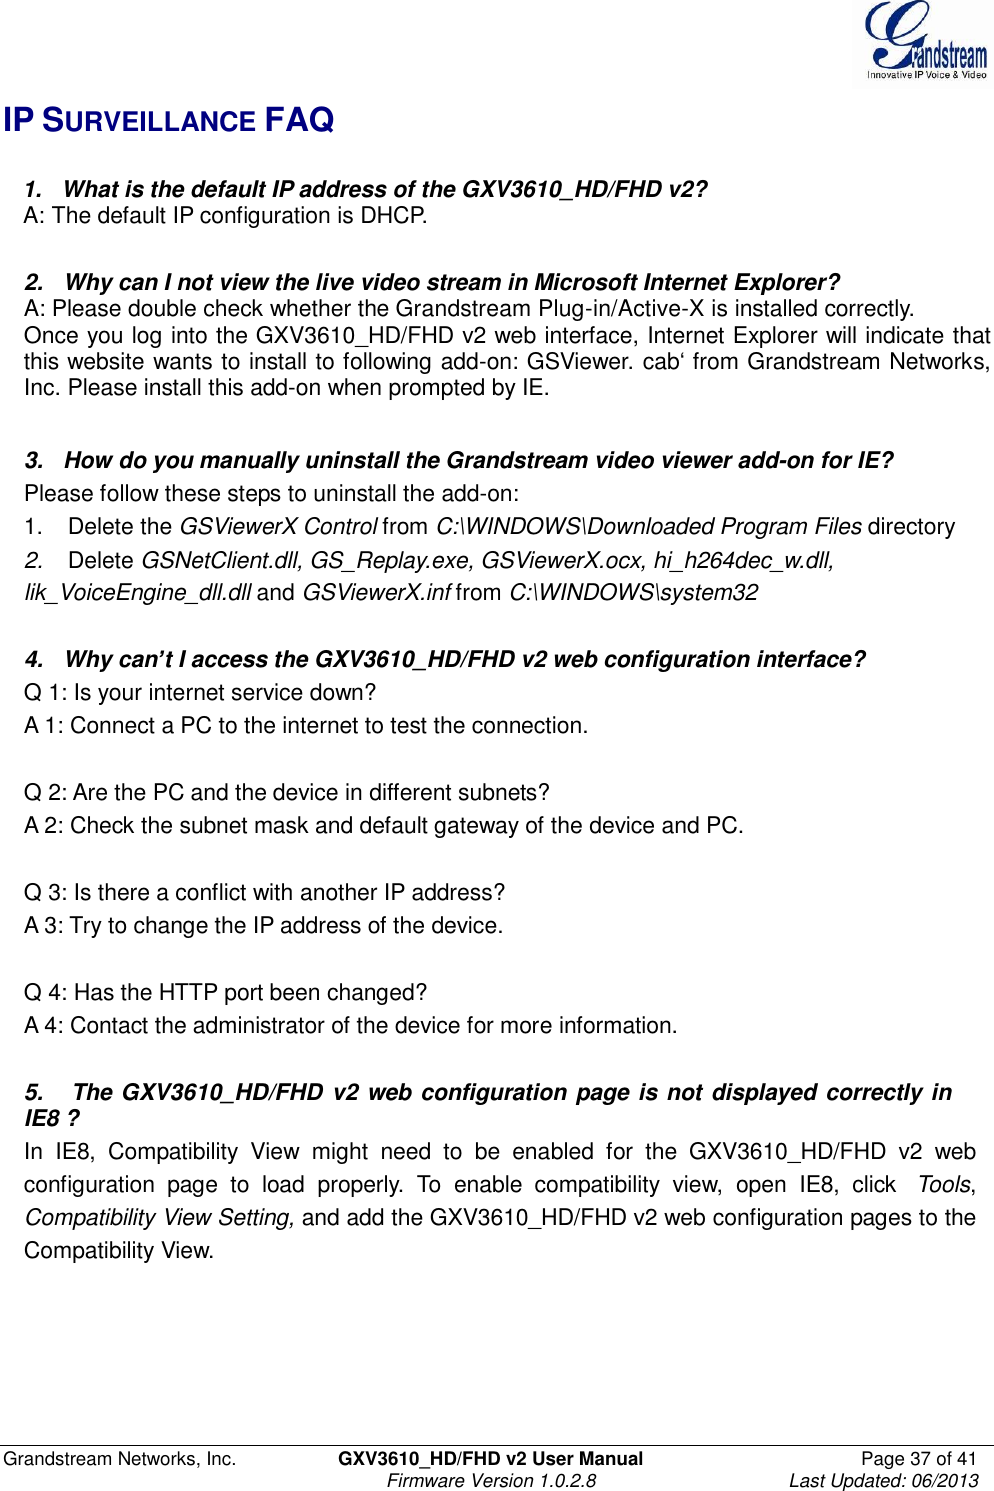  Grandstream Networks, Inc.  GXV3610_HD/FHD v2 User Manual  Page 37 of 41    Firmware Version 1.0.2.8  Last Updated: 06/2013  IP SURVEILLANCE FAQ     1.   What is the default IP address of the GXV3610_HD/FHD v2?    A: The default IP configuration is DHCP.   2.   Why can I not view the live video stream in Microsoft Internet Explorer? A: Please double check whether the Grandstream Plug-in/Active-X is installed correctly. Once you log into the GXV3610_HD/FHD v2 web interface, Internet Explorer will indicate that this website wants to install to following add-on: GSViewer. cab‘ from Grandstream Networks, Inc. Please install this add-on when prompted by IE.   3.   How do you manually uninstall the Grandstream video viewer add-on for IE? Please follow these steps to uninstall the add-on: 1.    Delete the GSViewerX Control from C:\WINDOWS\Downloaded Program Files directory 2.    Delete GSNetClient.dll, GS_Replay.exe, GSViewerX.ocx, hi_h264dec_w.dll, lik_VoiceEngine_dll.dll and GSViewerX.inf from C:\WINDOWS\system32   4.   Why can’t I access the GXV3610_HD/FHD v2 web configuration interface? Q 1: Is your internet service down? A 1: Connect a PC to the internet to test the connection.   Q 2: Are the PC and the device in different subnets? A 2: Check the subnet mask and default gateway of the device and PC.   Q 3: Is there a conflict with another IP address? A 3: Try to change the IP address of the device.   Q 4: Has the HTTP port been changed? A 4: Contact the administrator of the device for more information.   5.   The GXV3610_HD/FHD v2 web configuration page is not displayed correctly in IE8 ? In  IE8,  Compatibility  View  might  need  to  be  enabled  for  the  GXV3610_HD/FHD  v2  web configuration  page  to  load  properly.  To  enable  compatibility  view,  open  IE8,  click    Tools, Compatibility View Setting, and add the GXV3610_HD/FHD v2 web configuration pages to the Compatibility View.   